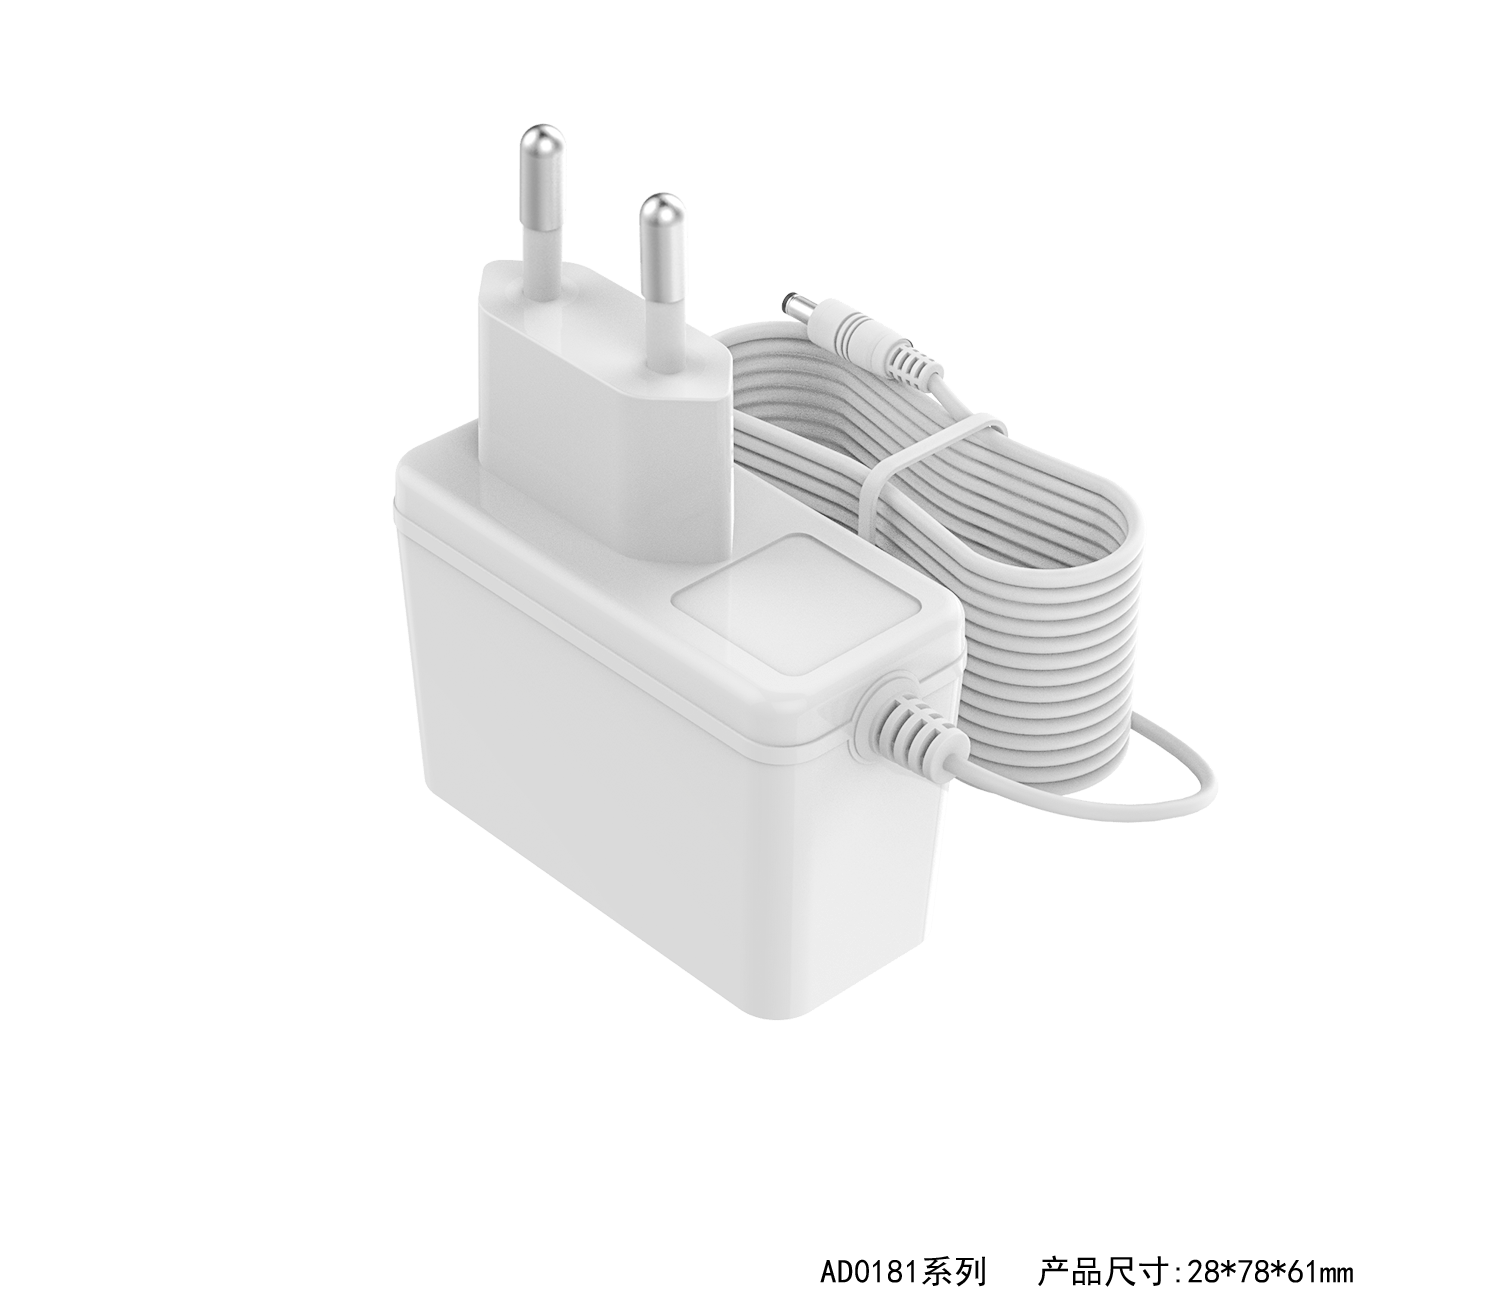 Wholesale ac adapter laptop charger,odm ac adapter usb charger, ac usb adapter charger, auxiliary power outlet adapter factory 